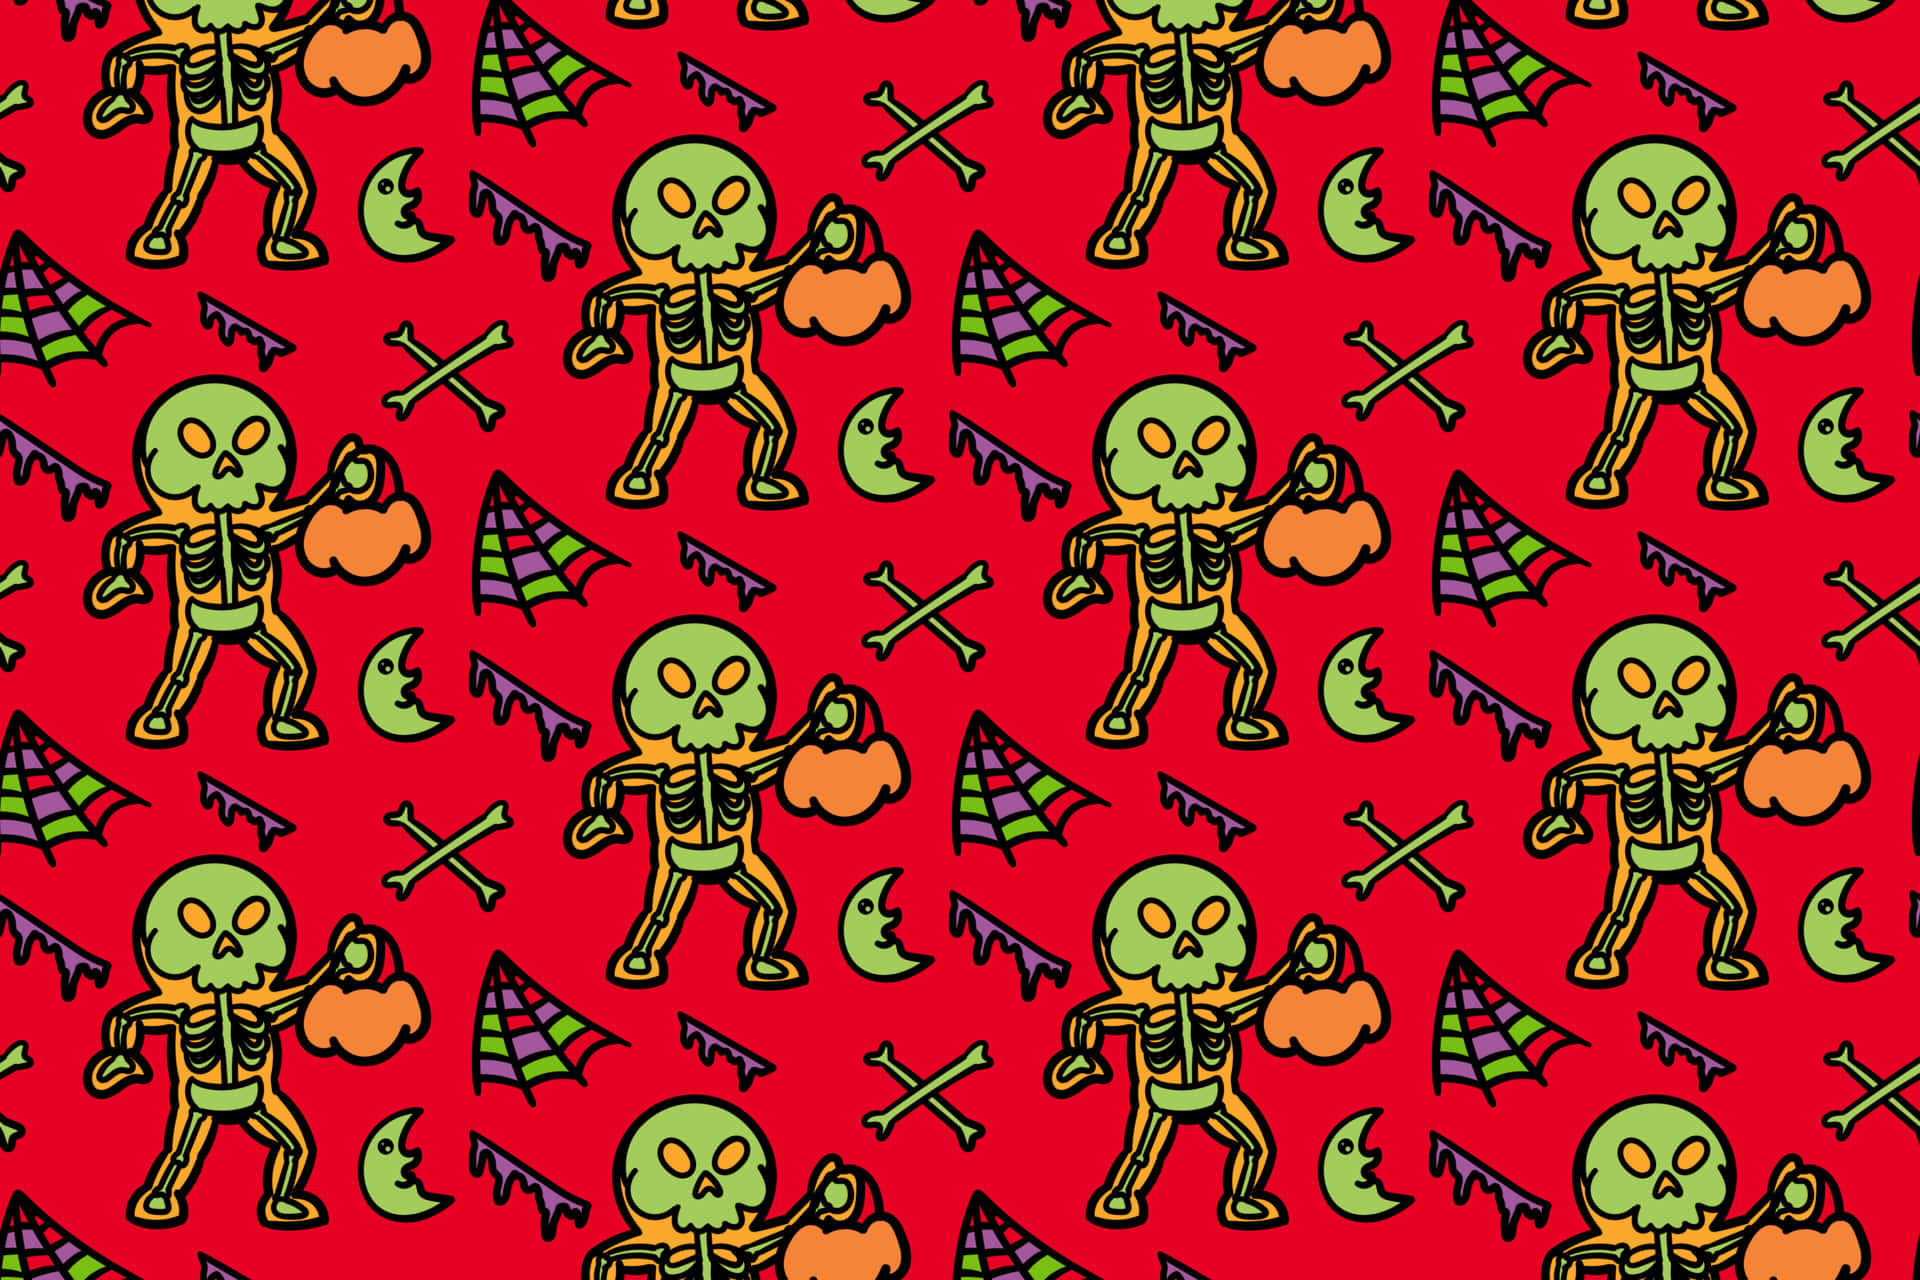 Get Into the Halloween Spirit with These Stylish Skeleton Costumes! Wallpaper